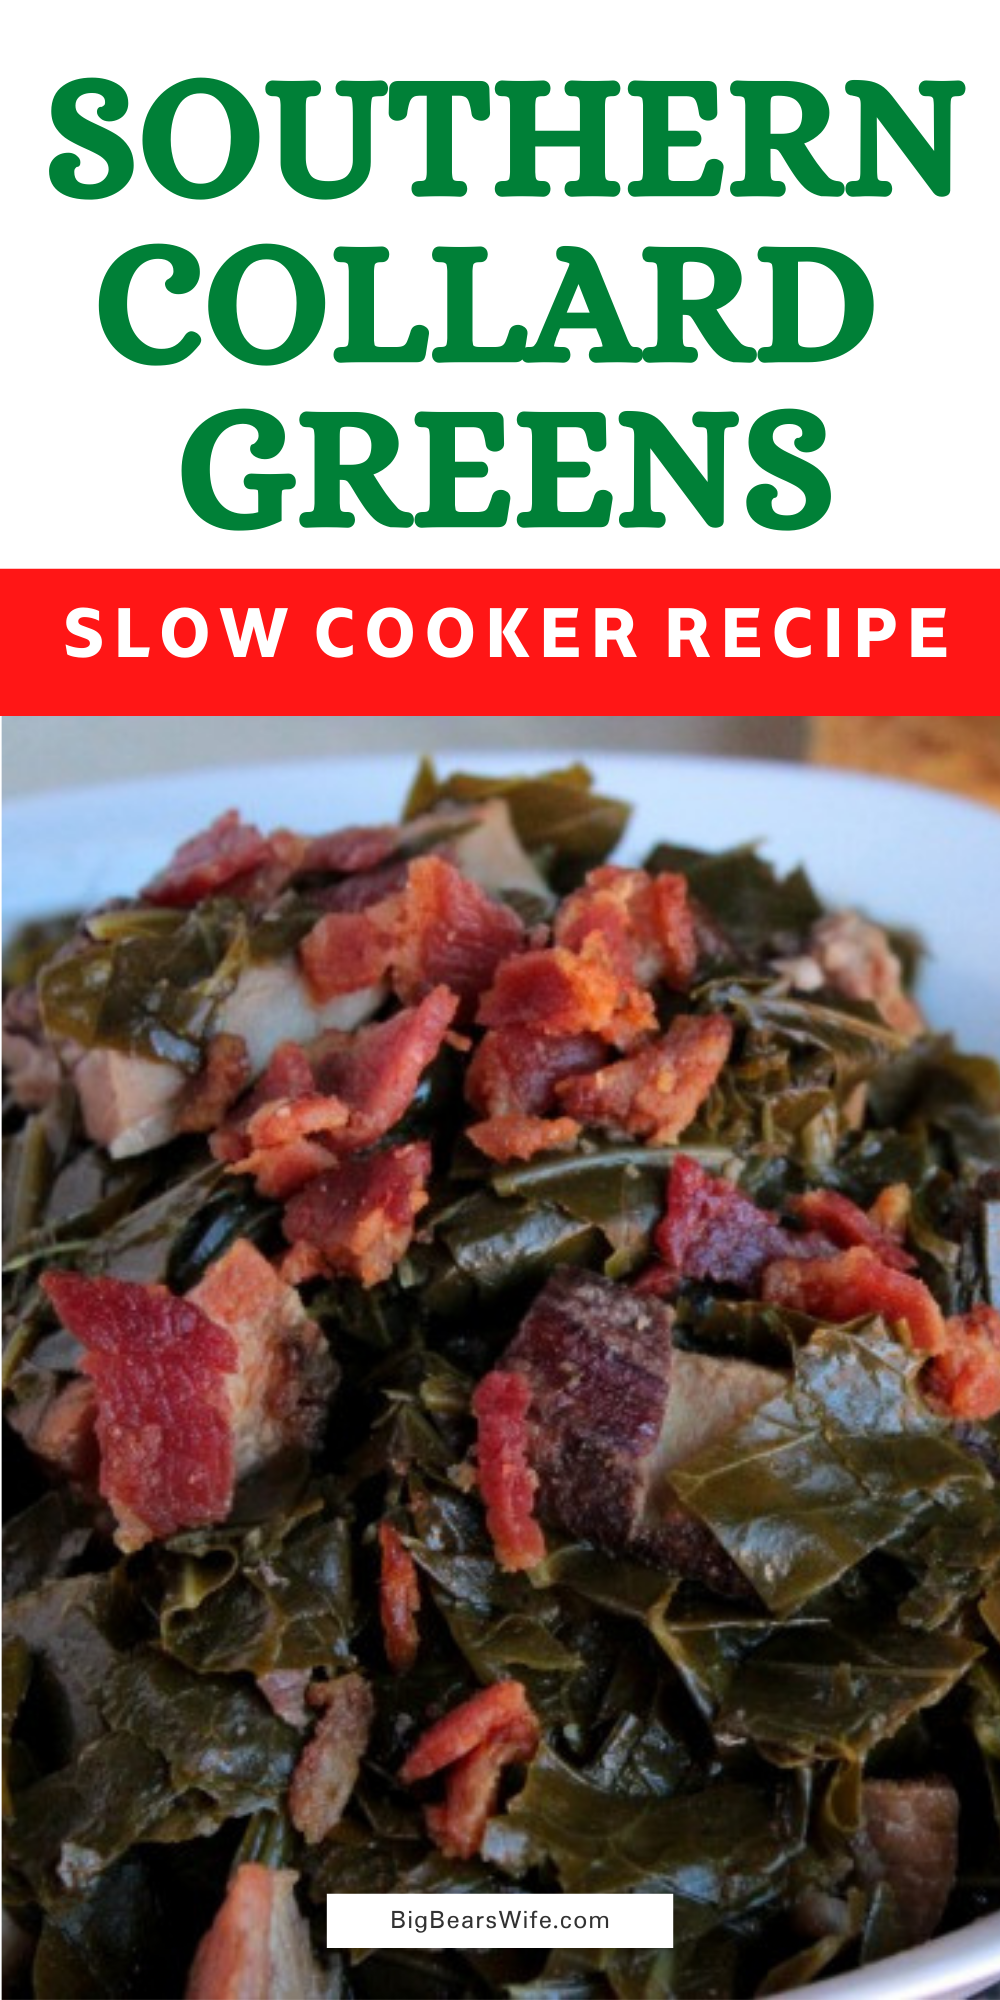 Make the best Collard Greens that you've ever had by slowly cooking them southern style! Southern Slow Cooked Collard Greens are full of amazing flavors!
This recipe for Southern Slow Cooked Collard Greens is one of our favorites to make for New Years Eve! We also love to make Southern Slow Cooked Collard Greens to serve with brisket, BBQ Chicken and BBQ Ribs!  via @bigbearswife